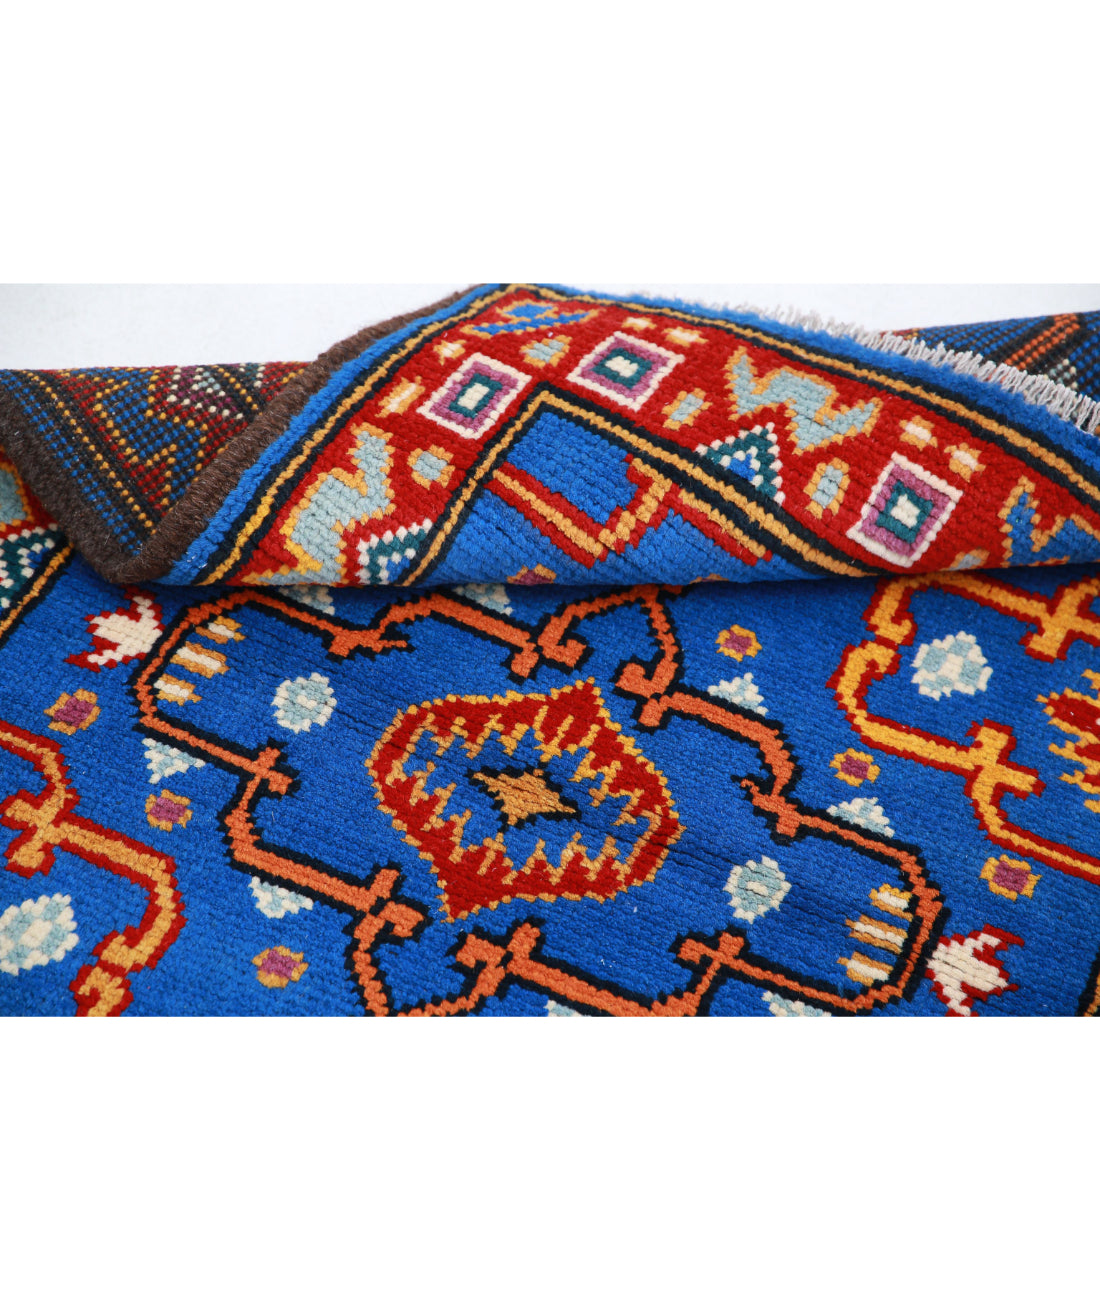 Revival 2'8'' X 4'1'' Hand-Knotted Wool Rug 2'8'' x 4'1'' (80 X 123) / Blue / Red